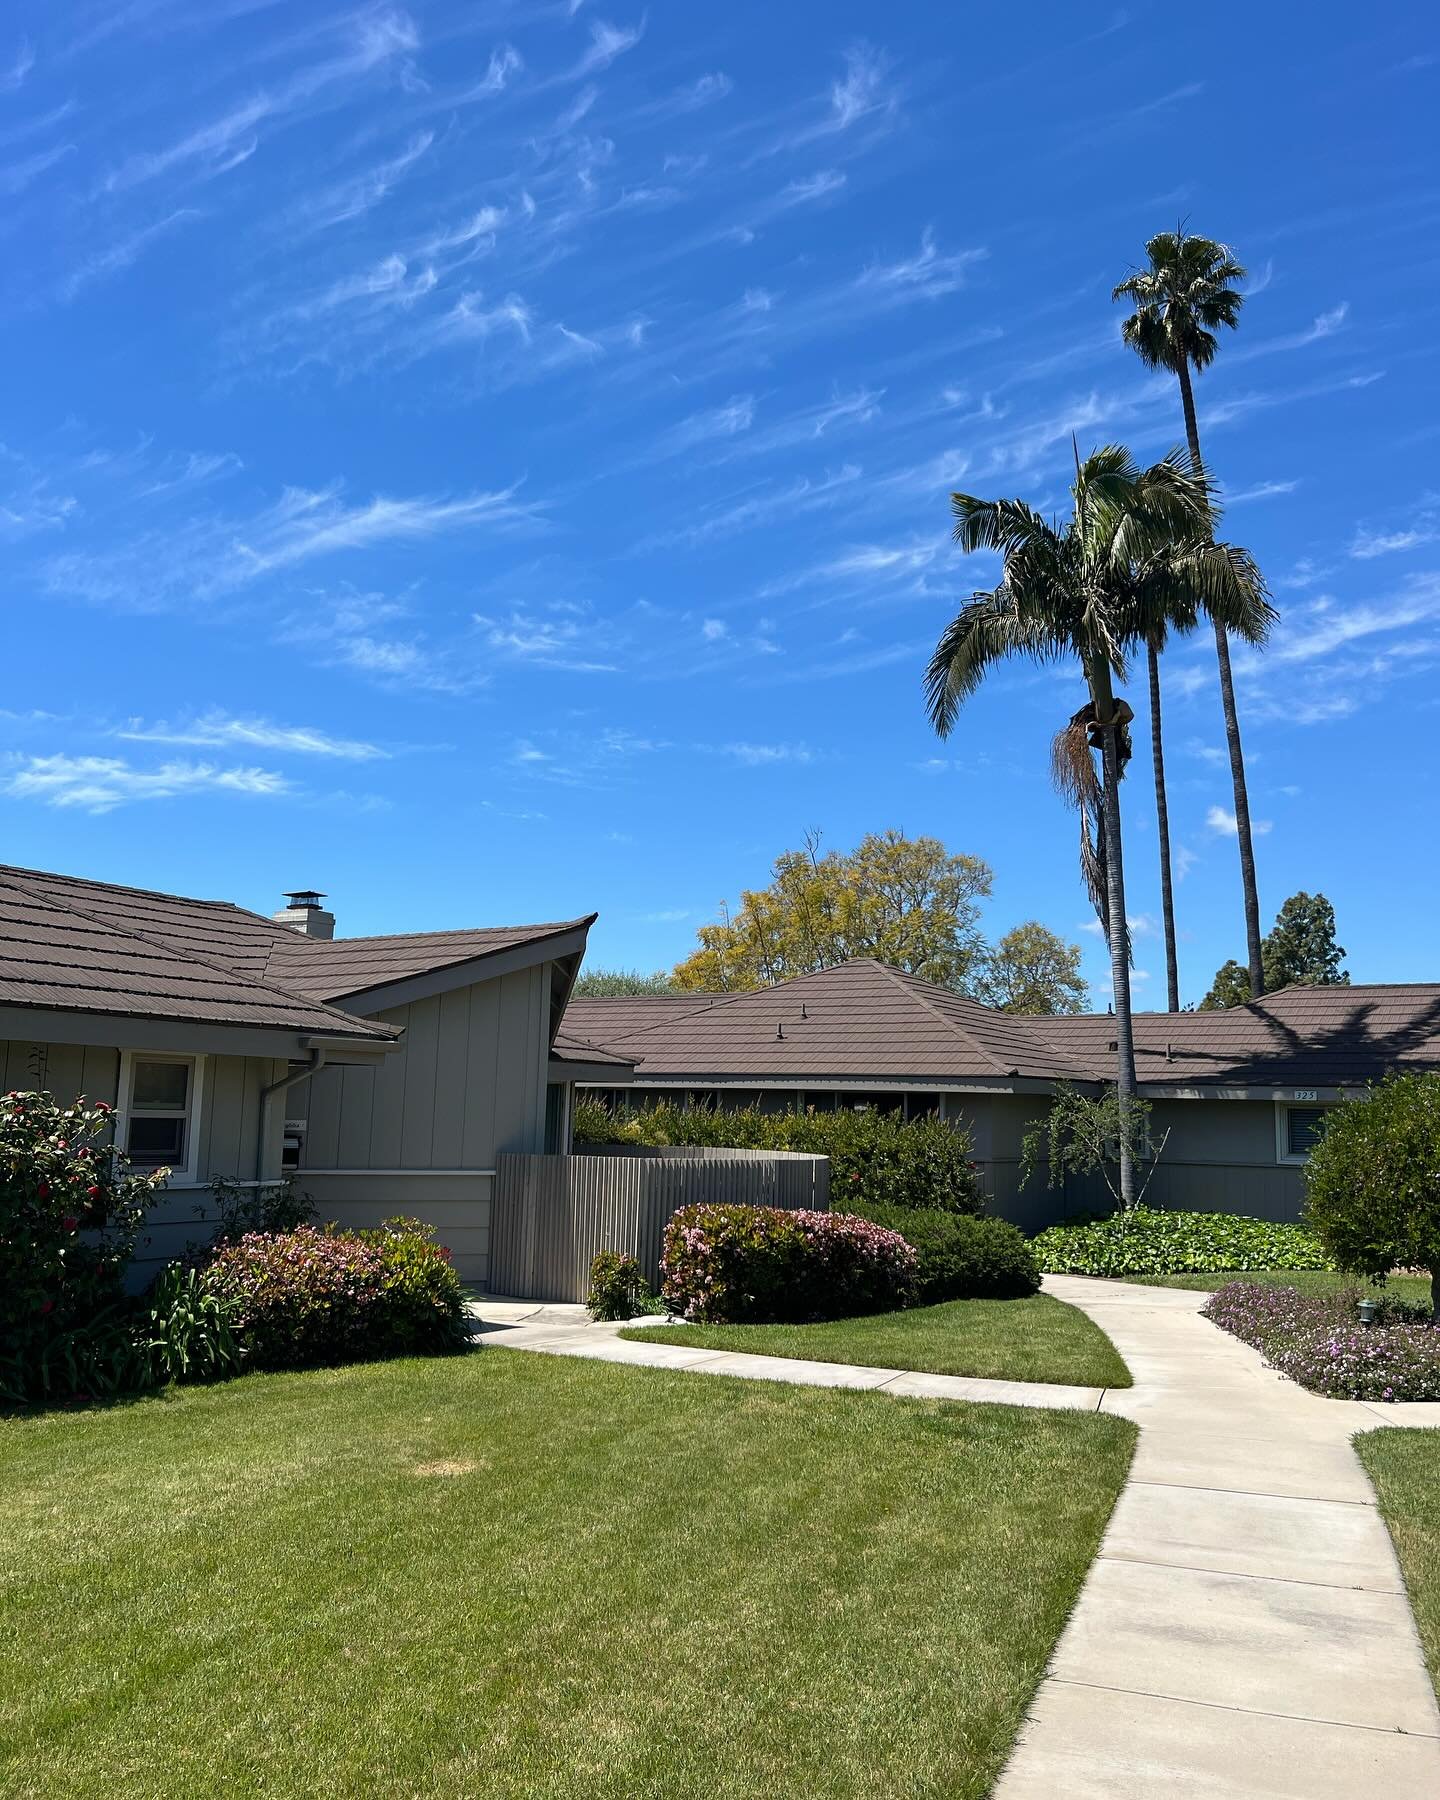 It&rsquo;s a beautiful day in Goleta for a home inspection!